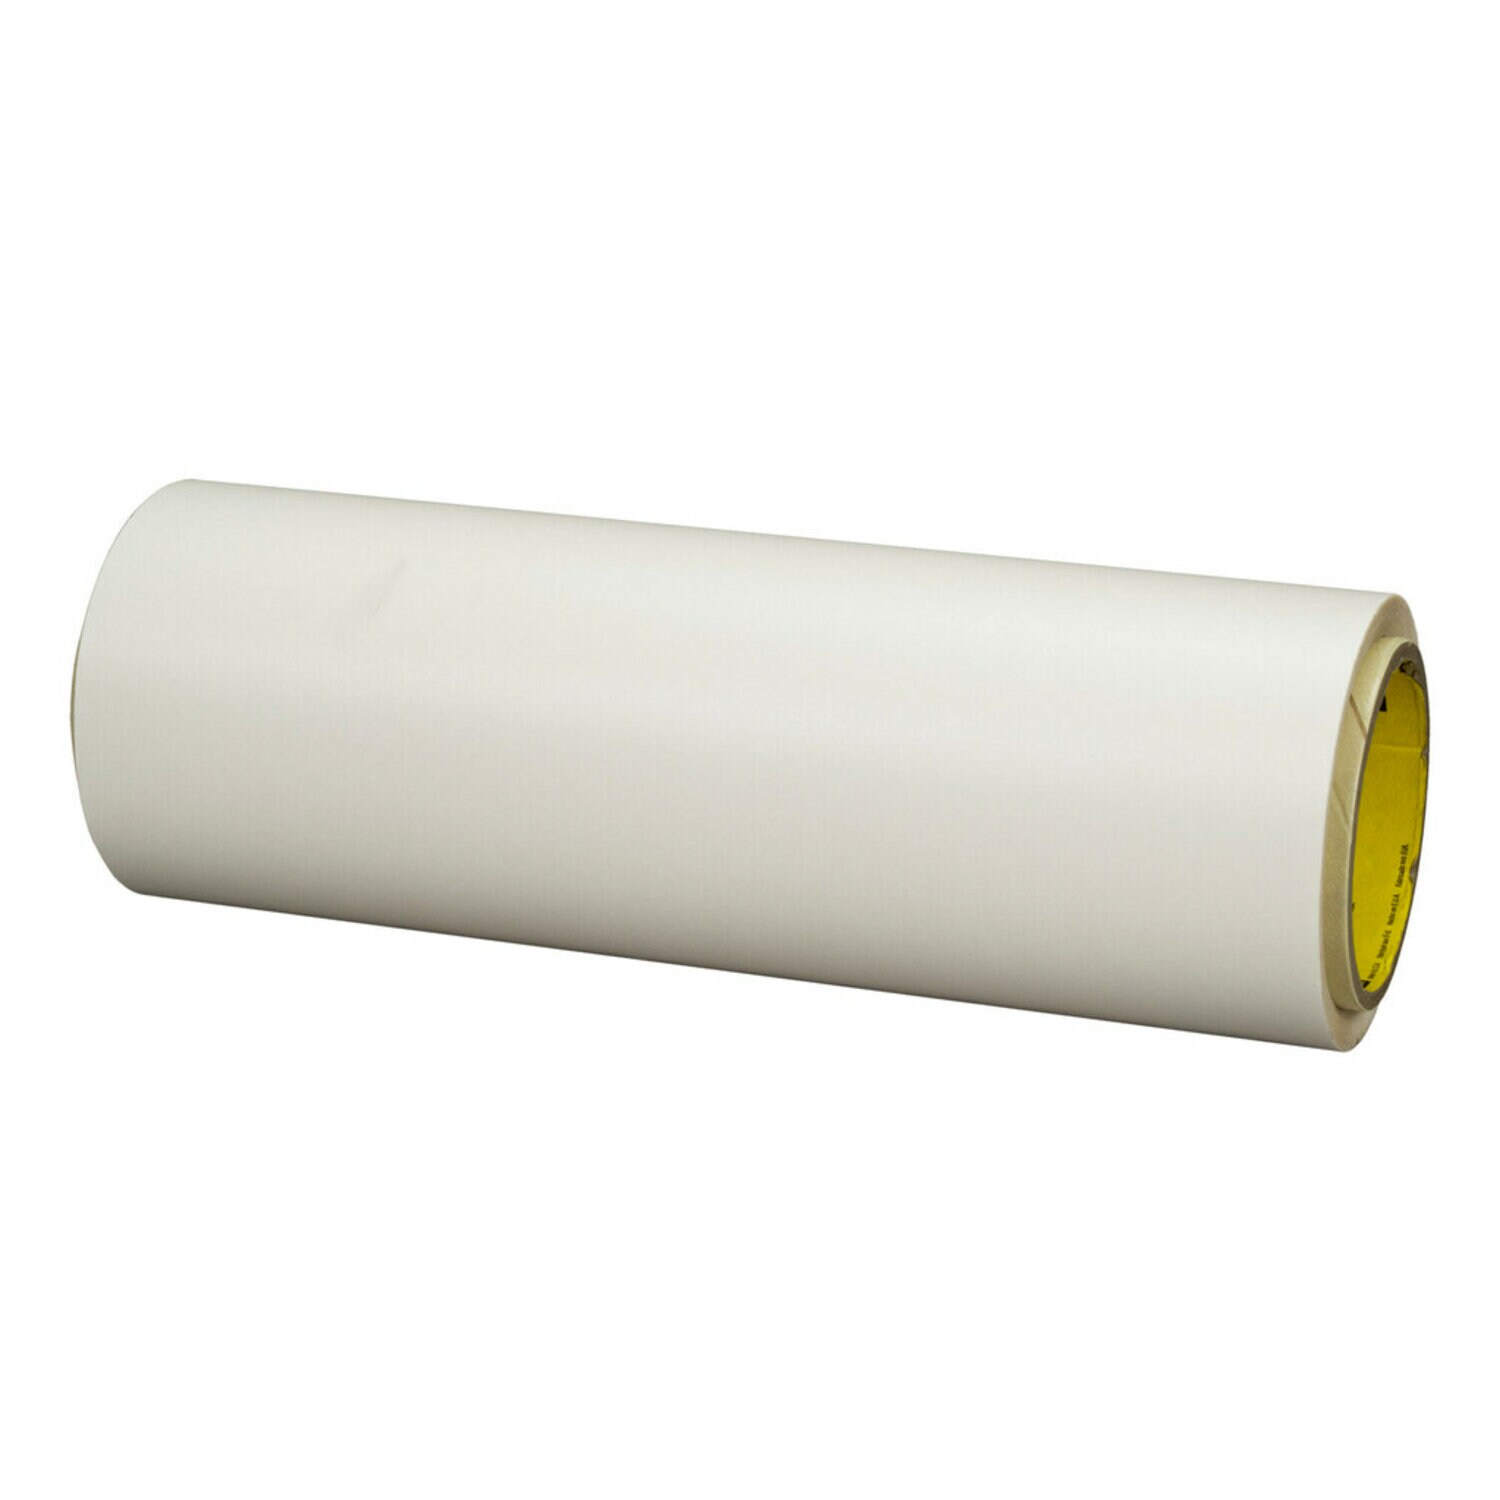 7010335914 - 3M Adhesive Transfer Tape 9775WL, Clear, 54 in x 180 yd, 5 mil, 1
Roll/Case